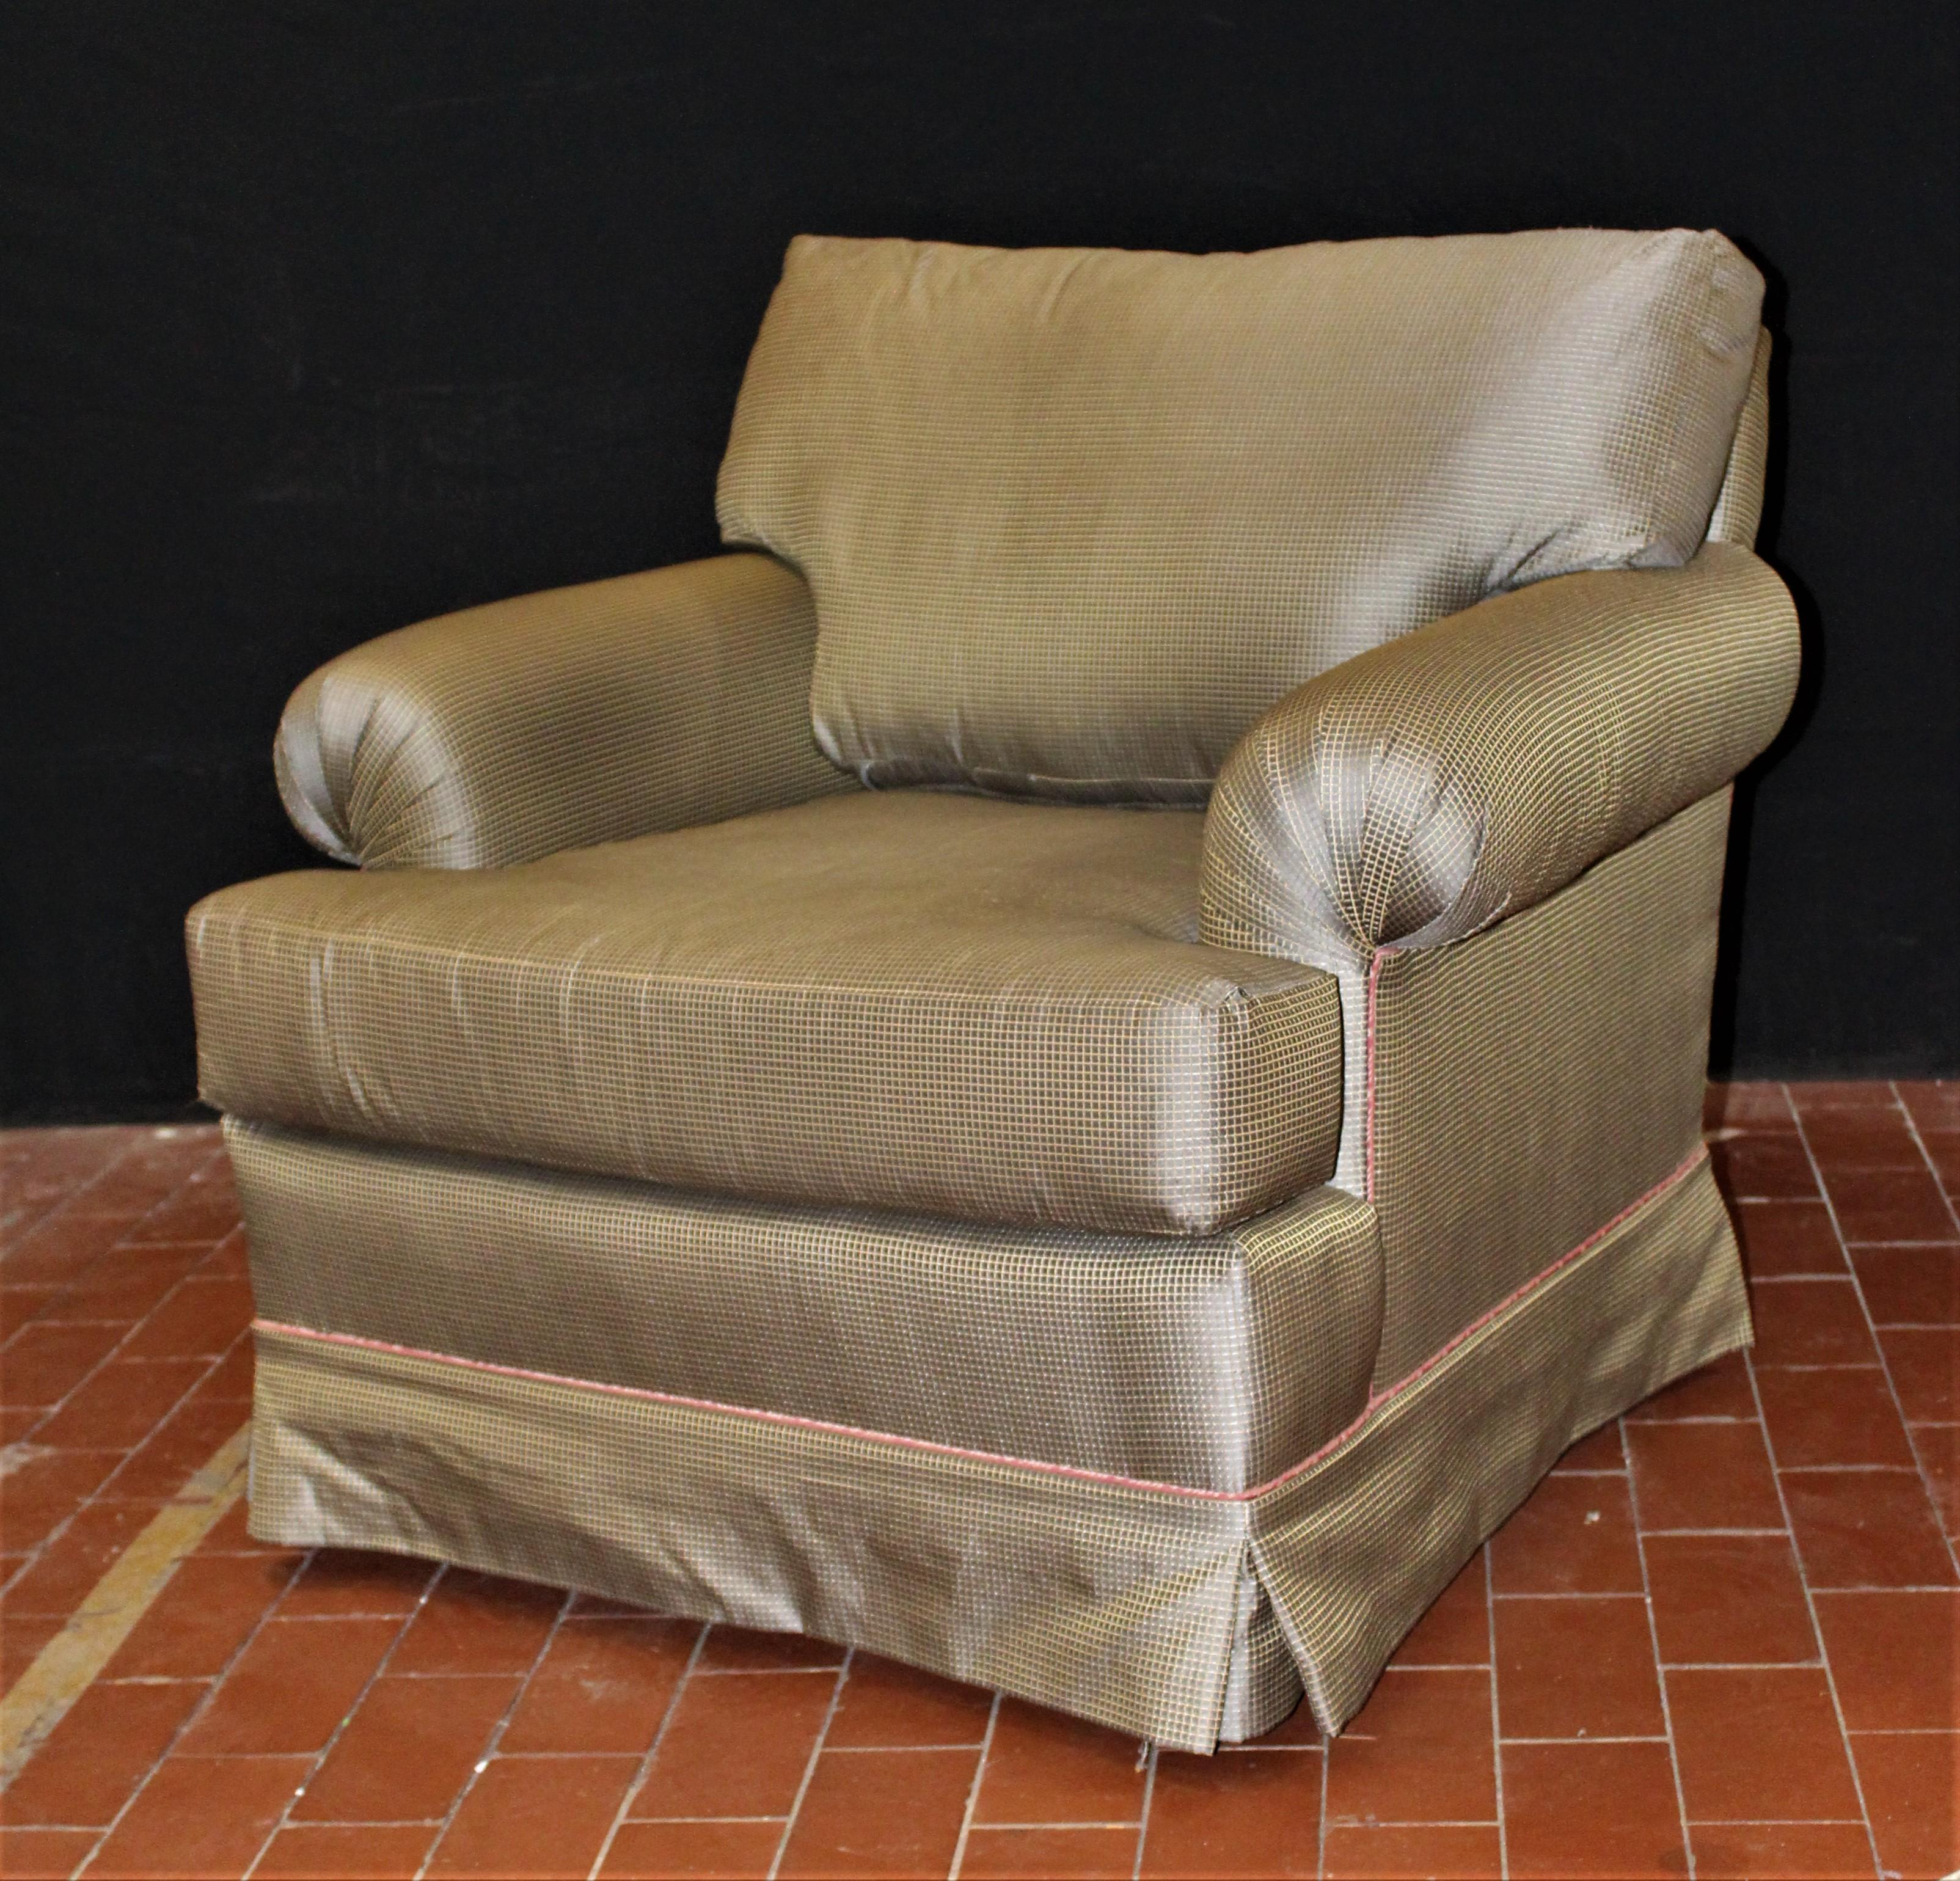 comfy chair with ottoman